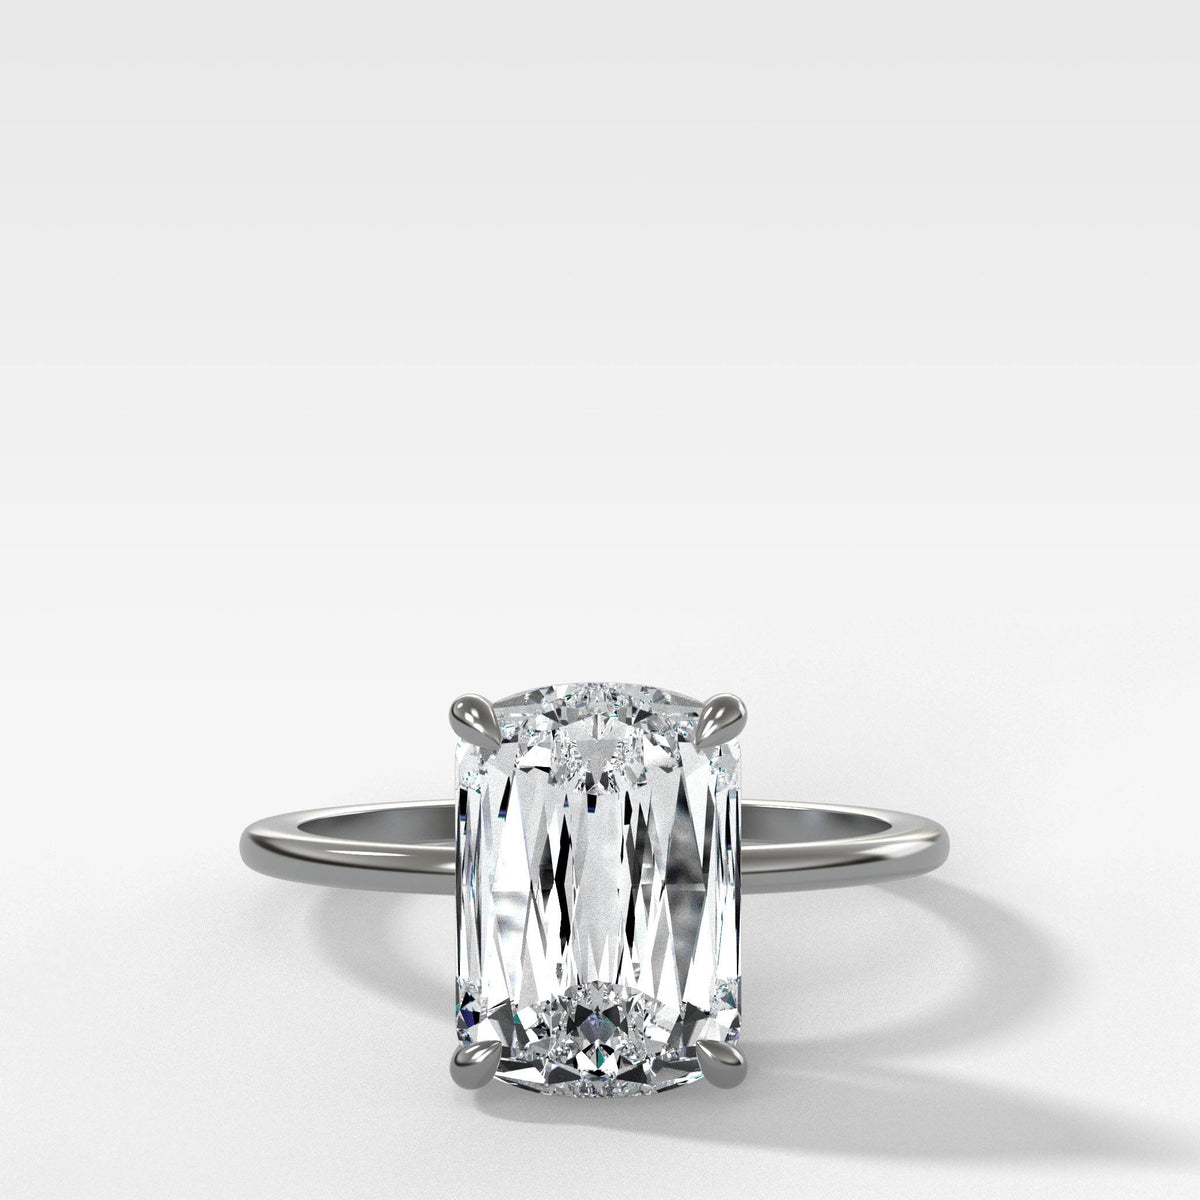 Thin + Simple Solitaire with 3.05Ct Crisscut Cushion Cut by Good Stone in White Gold